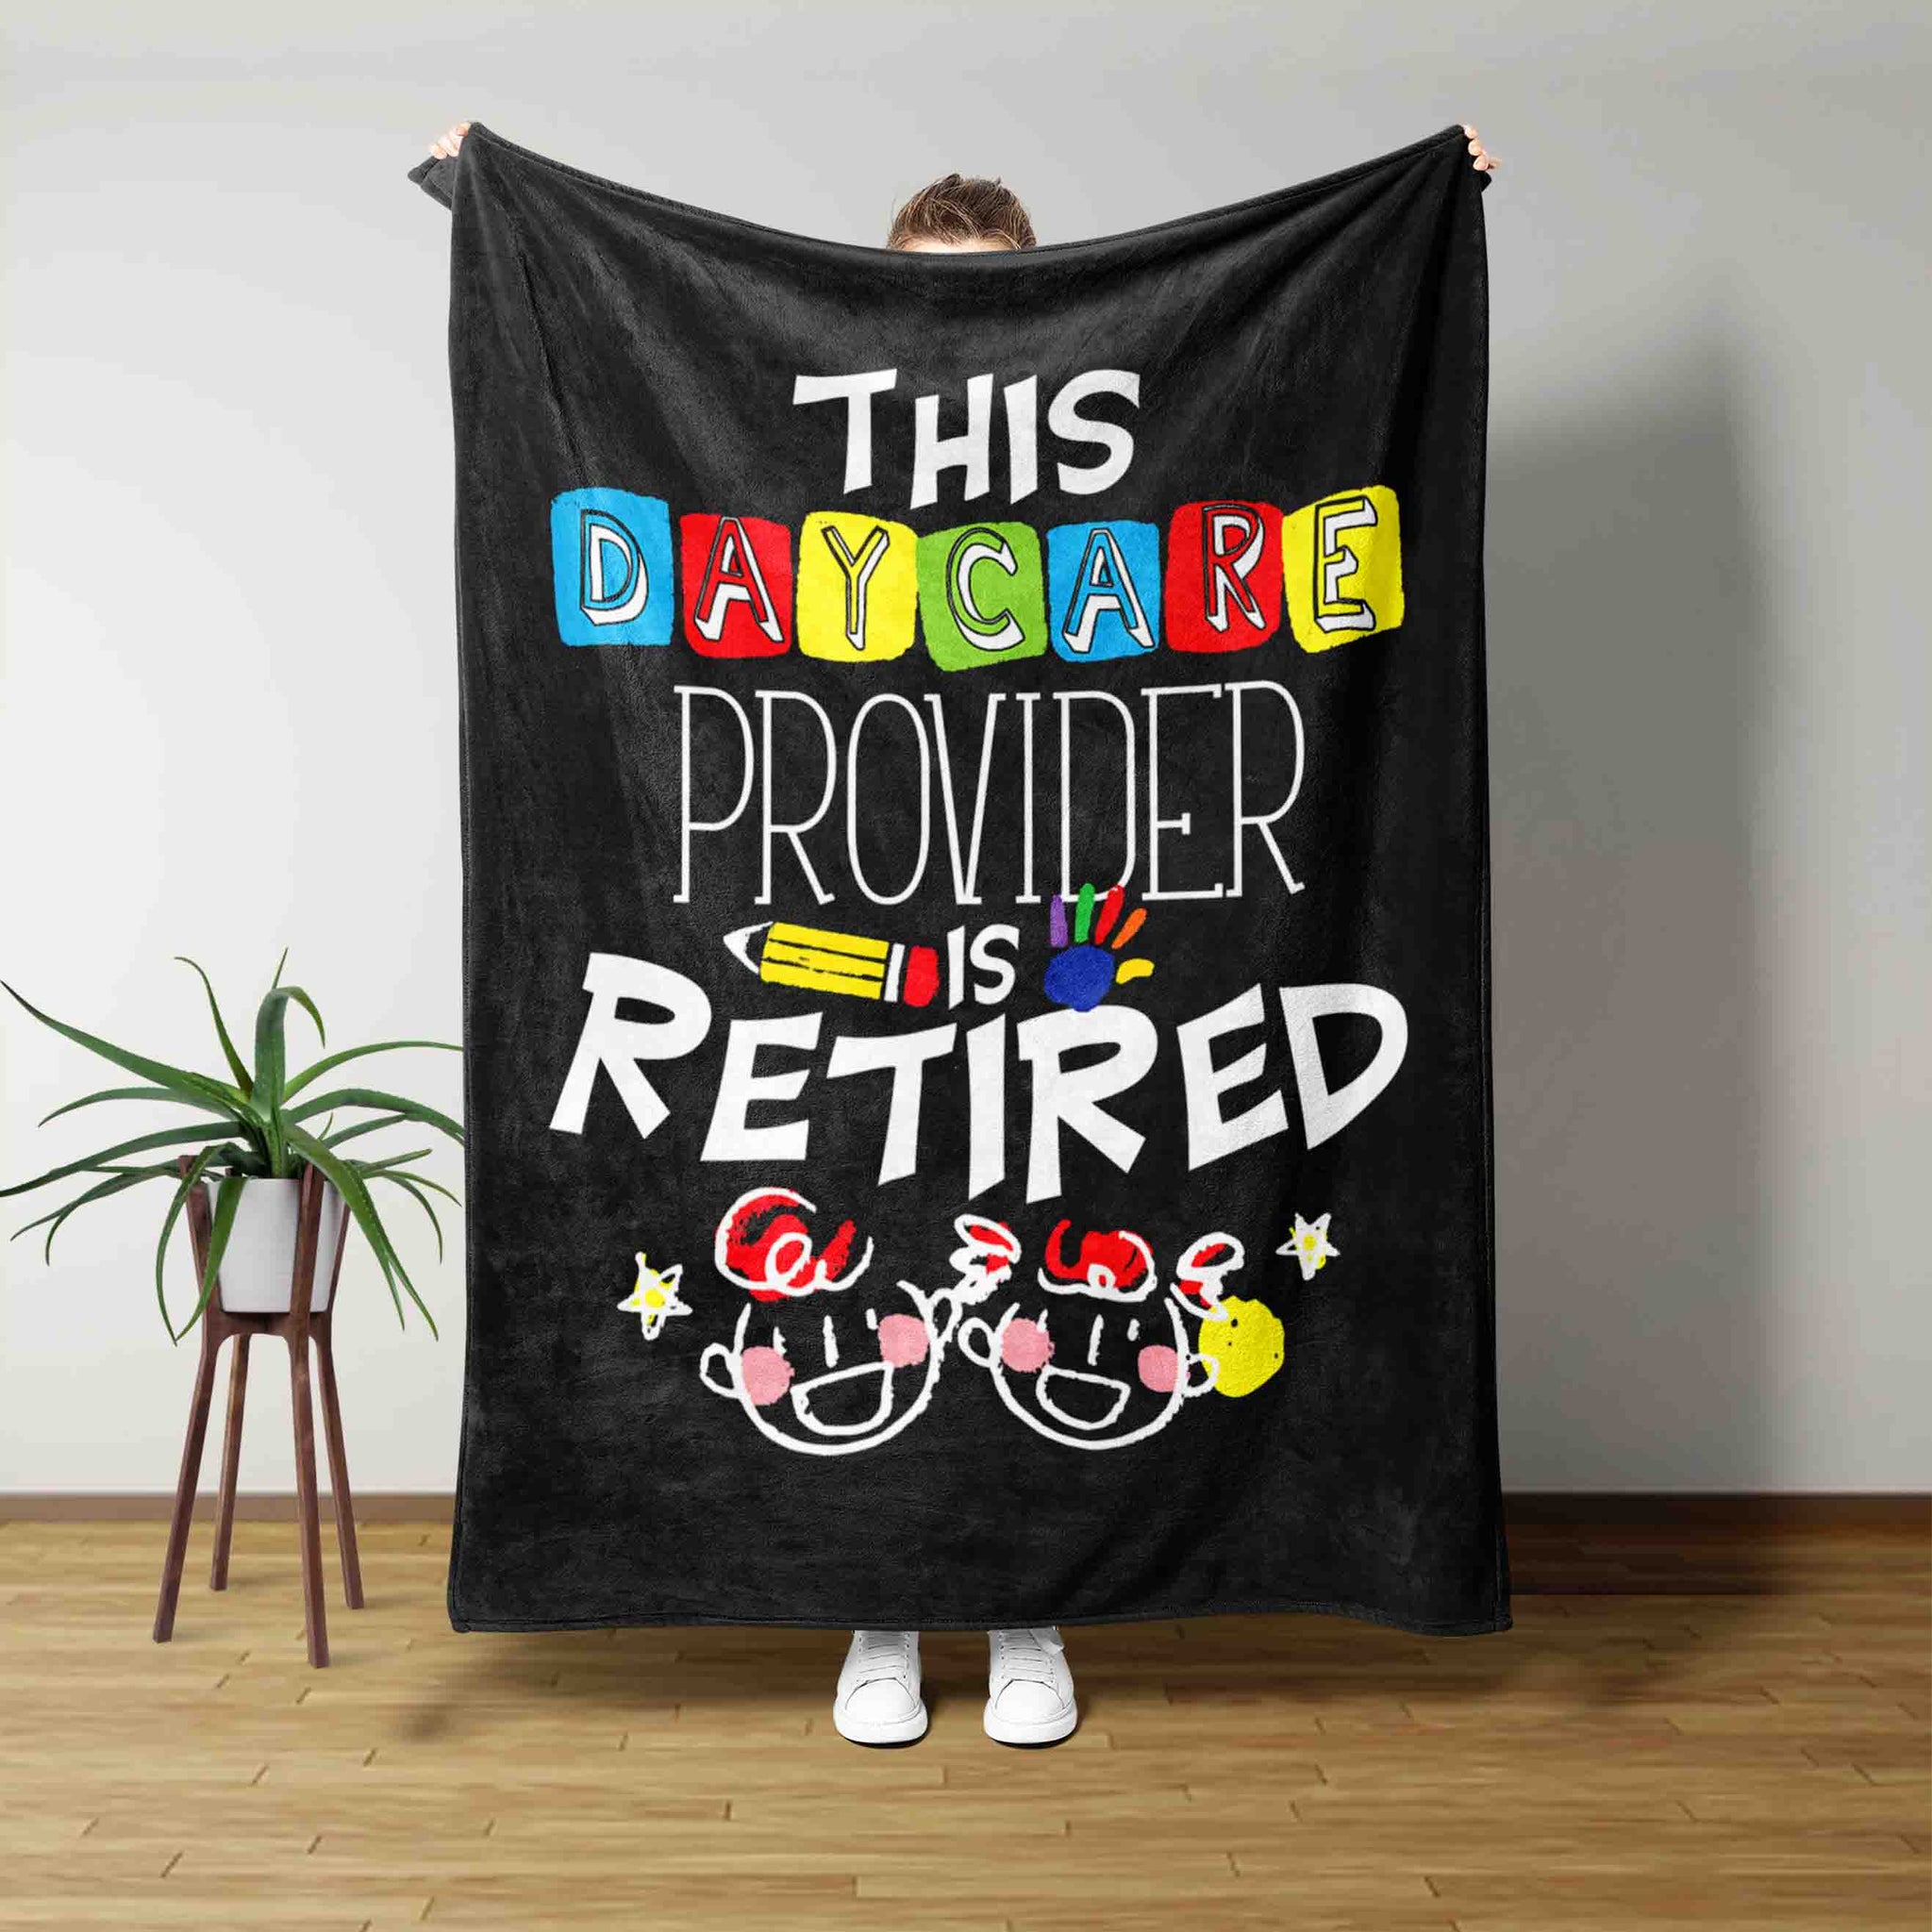 This Daycare Provider Is Retired Blanket, Daycare Provider Blanket, Retirement Blanket, Teacher Blanket, Teacher Retirement Gift, Daycare Provider Gift